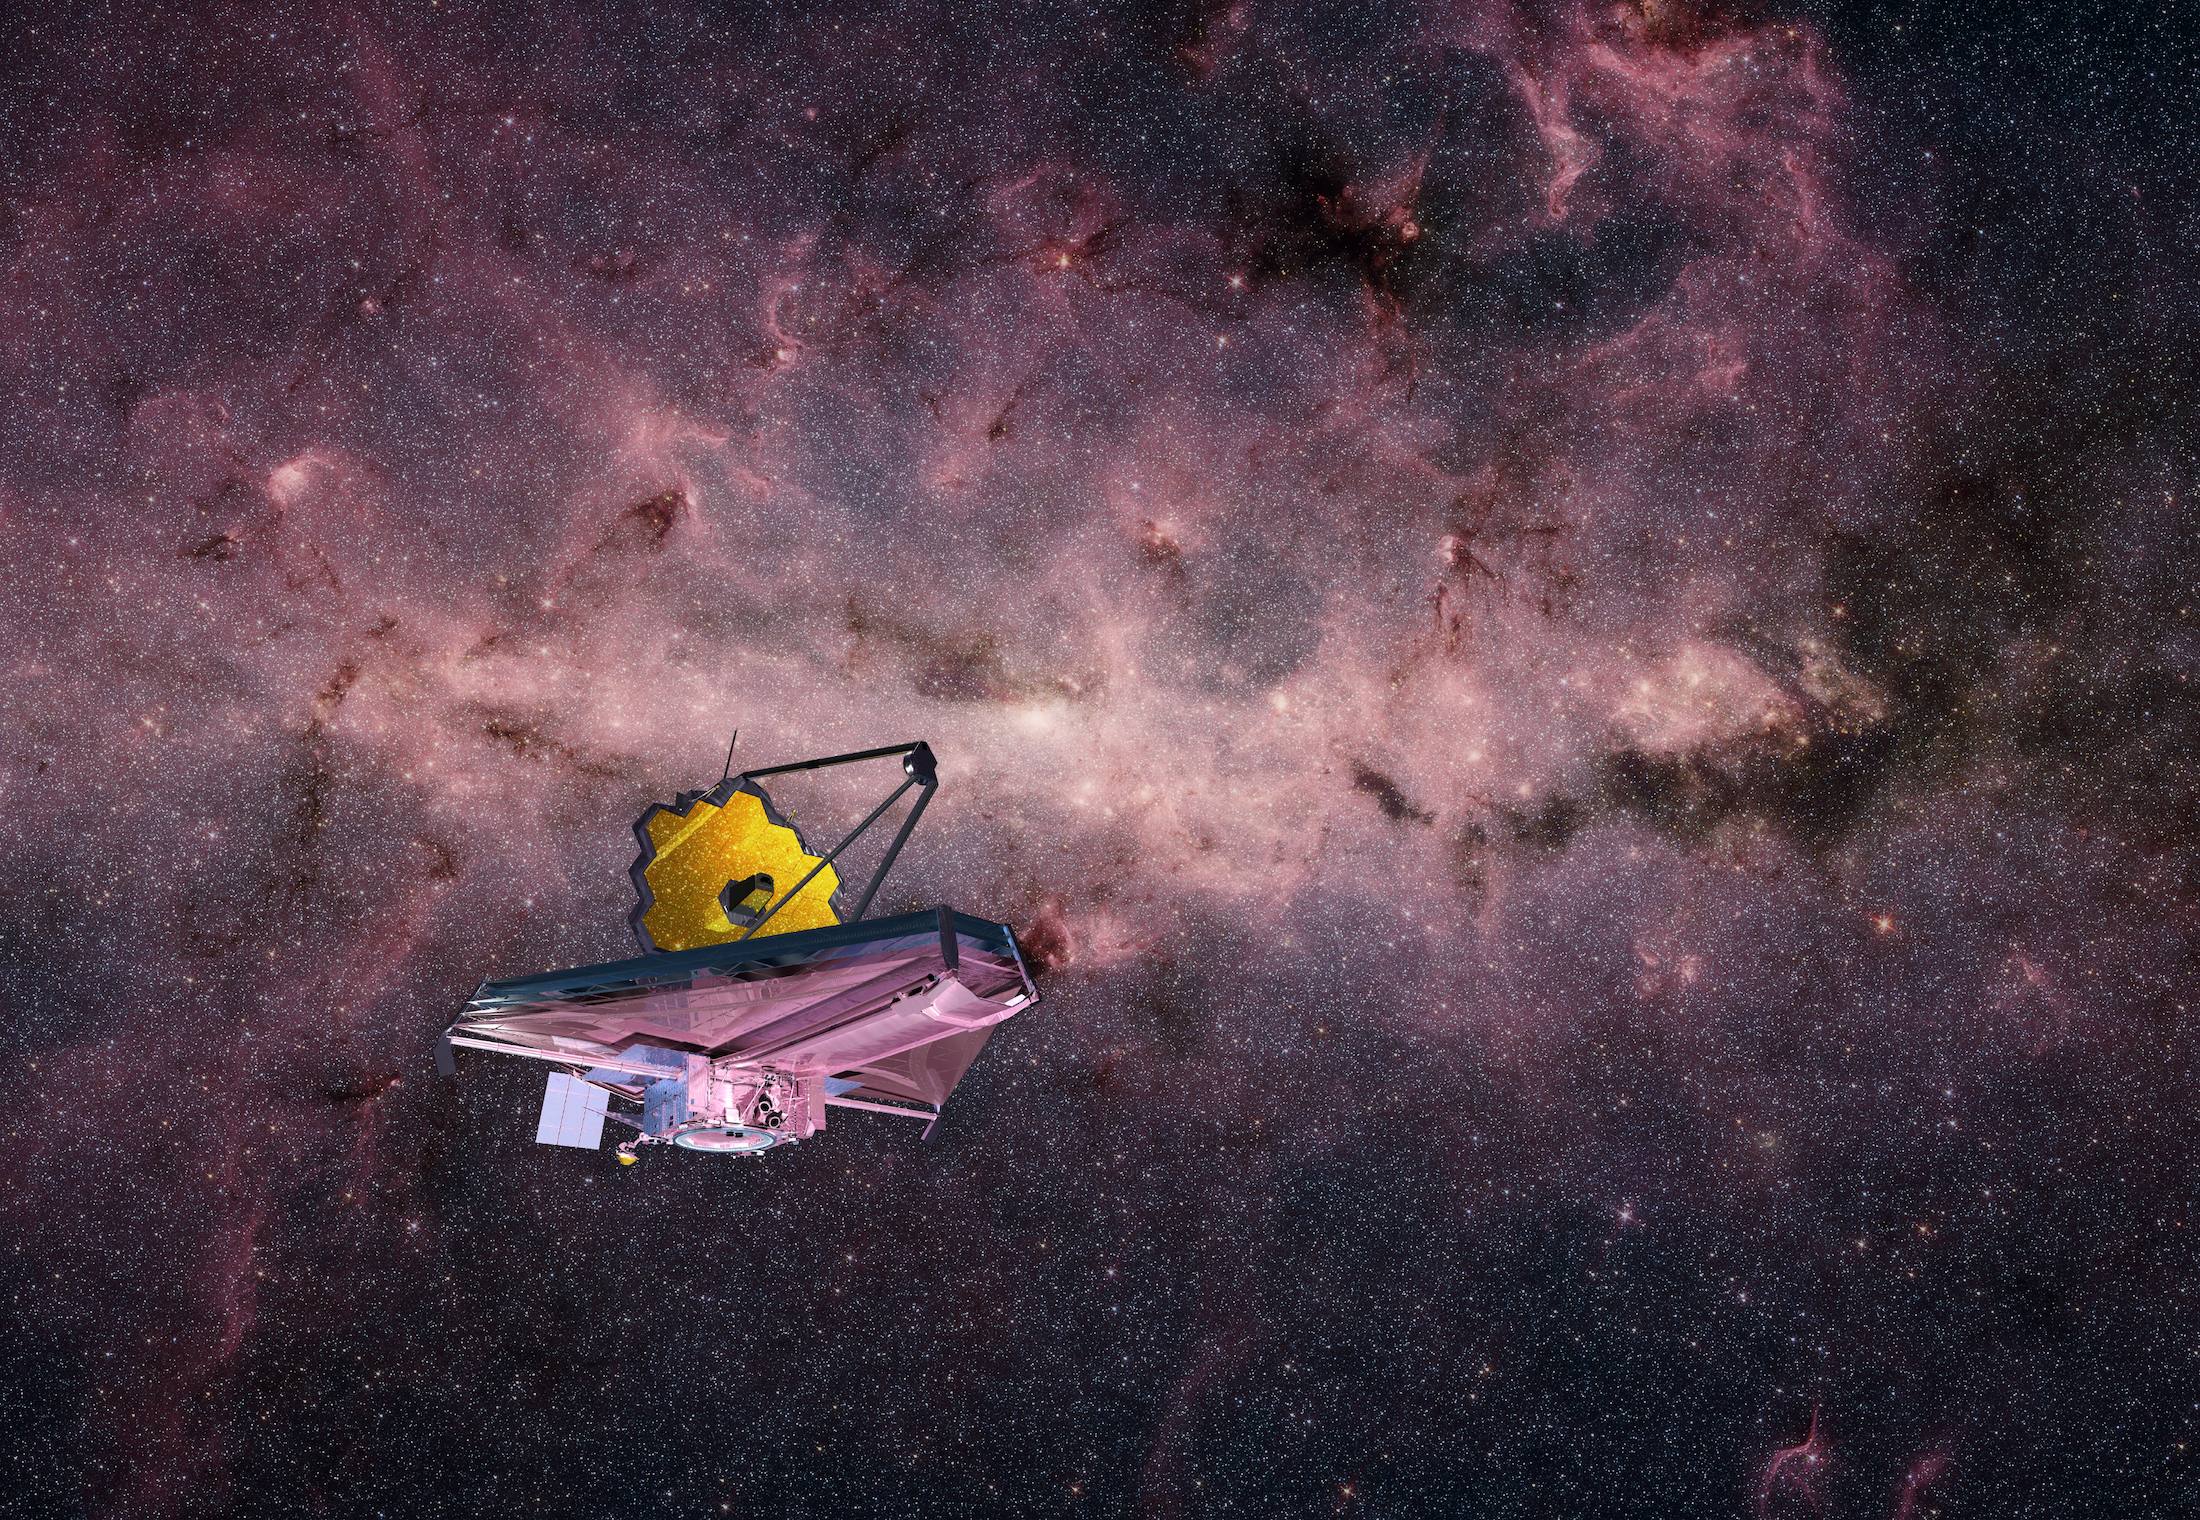 An illustration of the James Webb Space Telescope and the universe in the background. Deposiphotos.